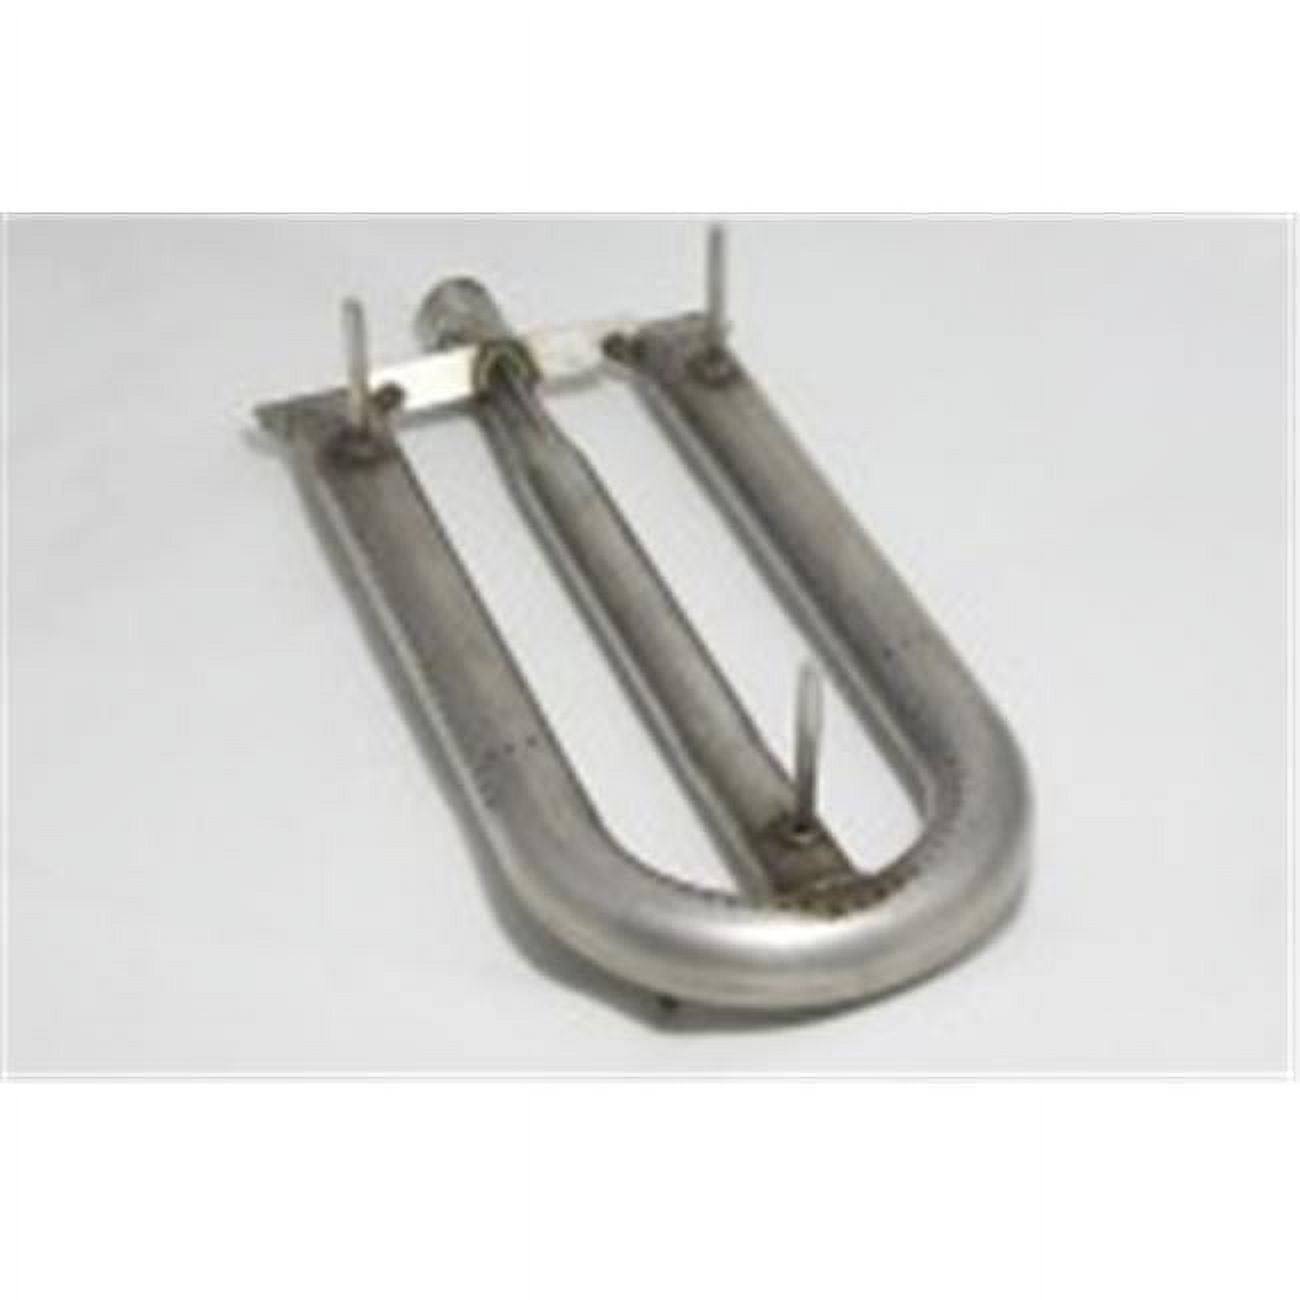 24-b-06 Replacement Stainless Steel Tube Burner